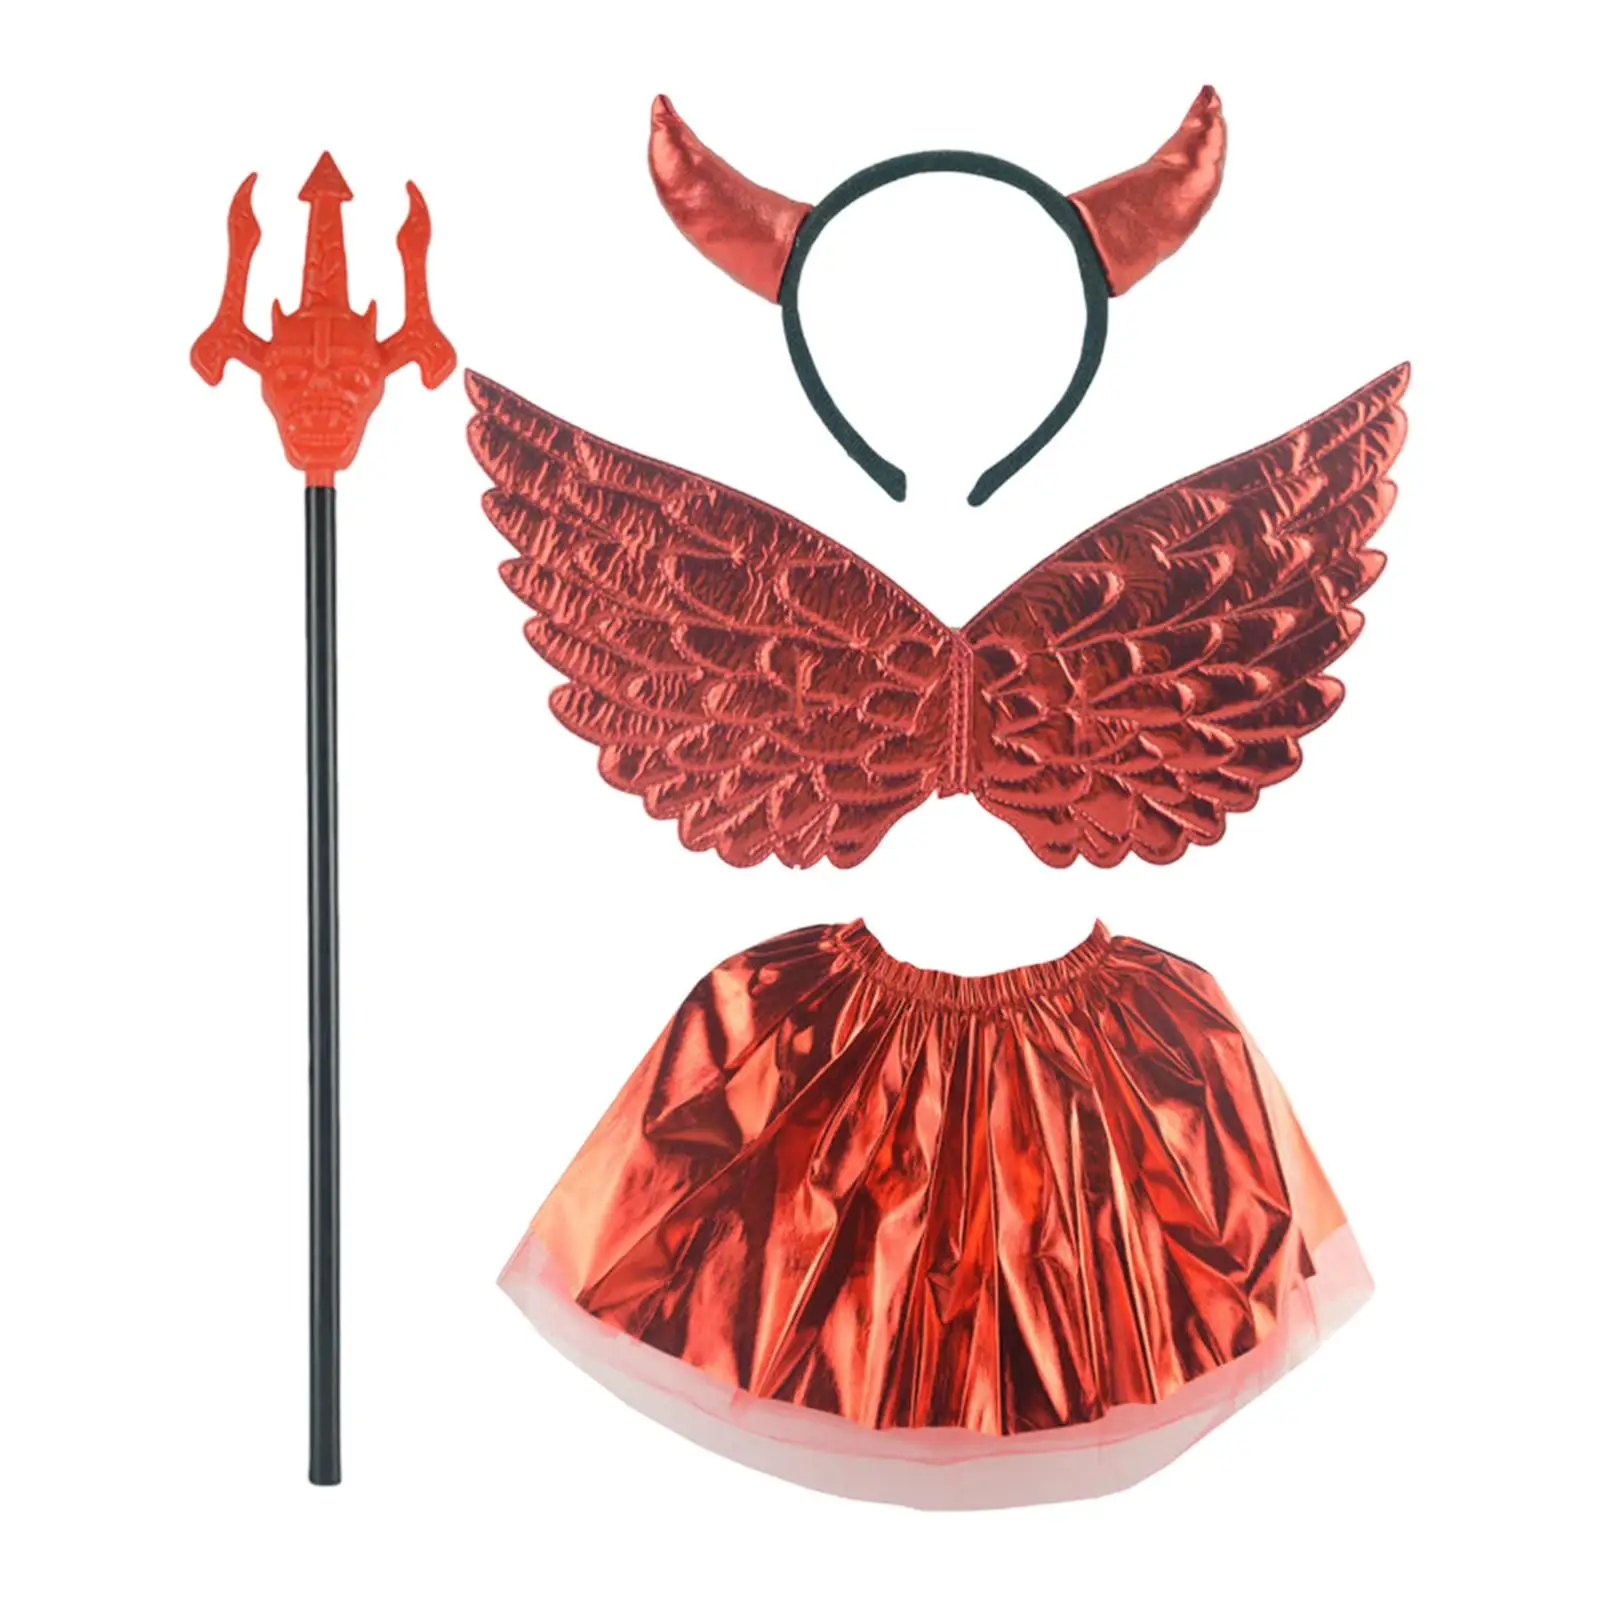 Girls Costume Decoration Hair Hoop Accessories Halloween Devil Costume for Kids for Festival Carnivals Masquerade Party Children